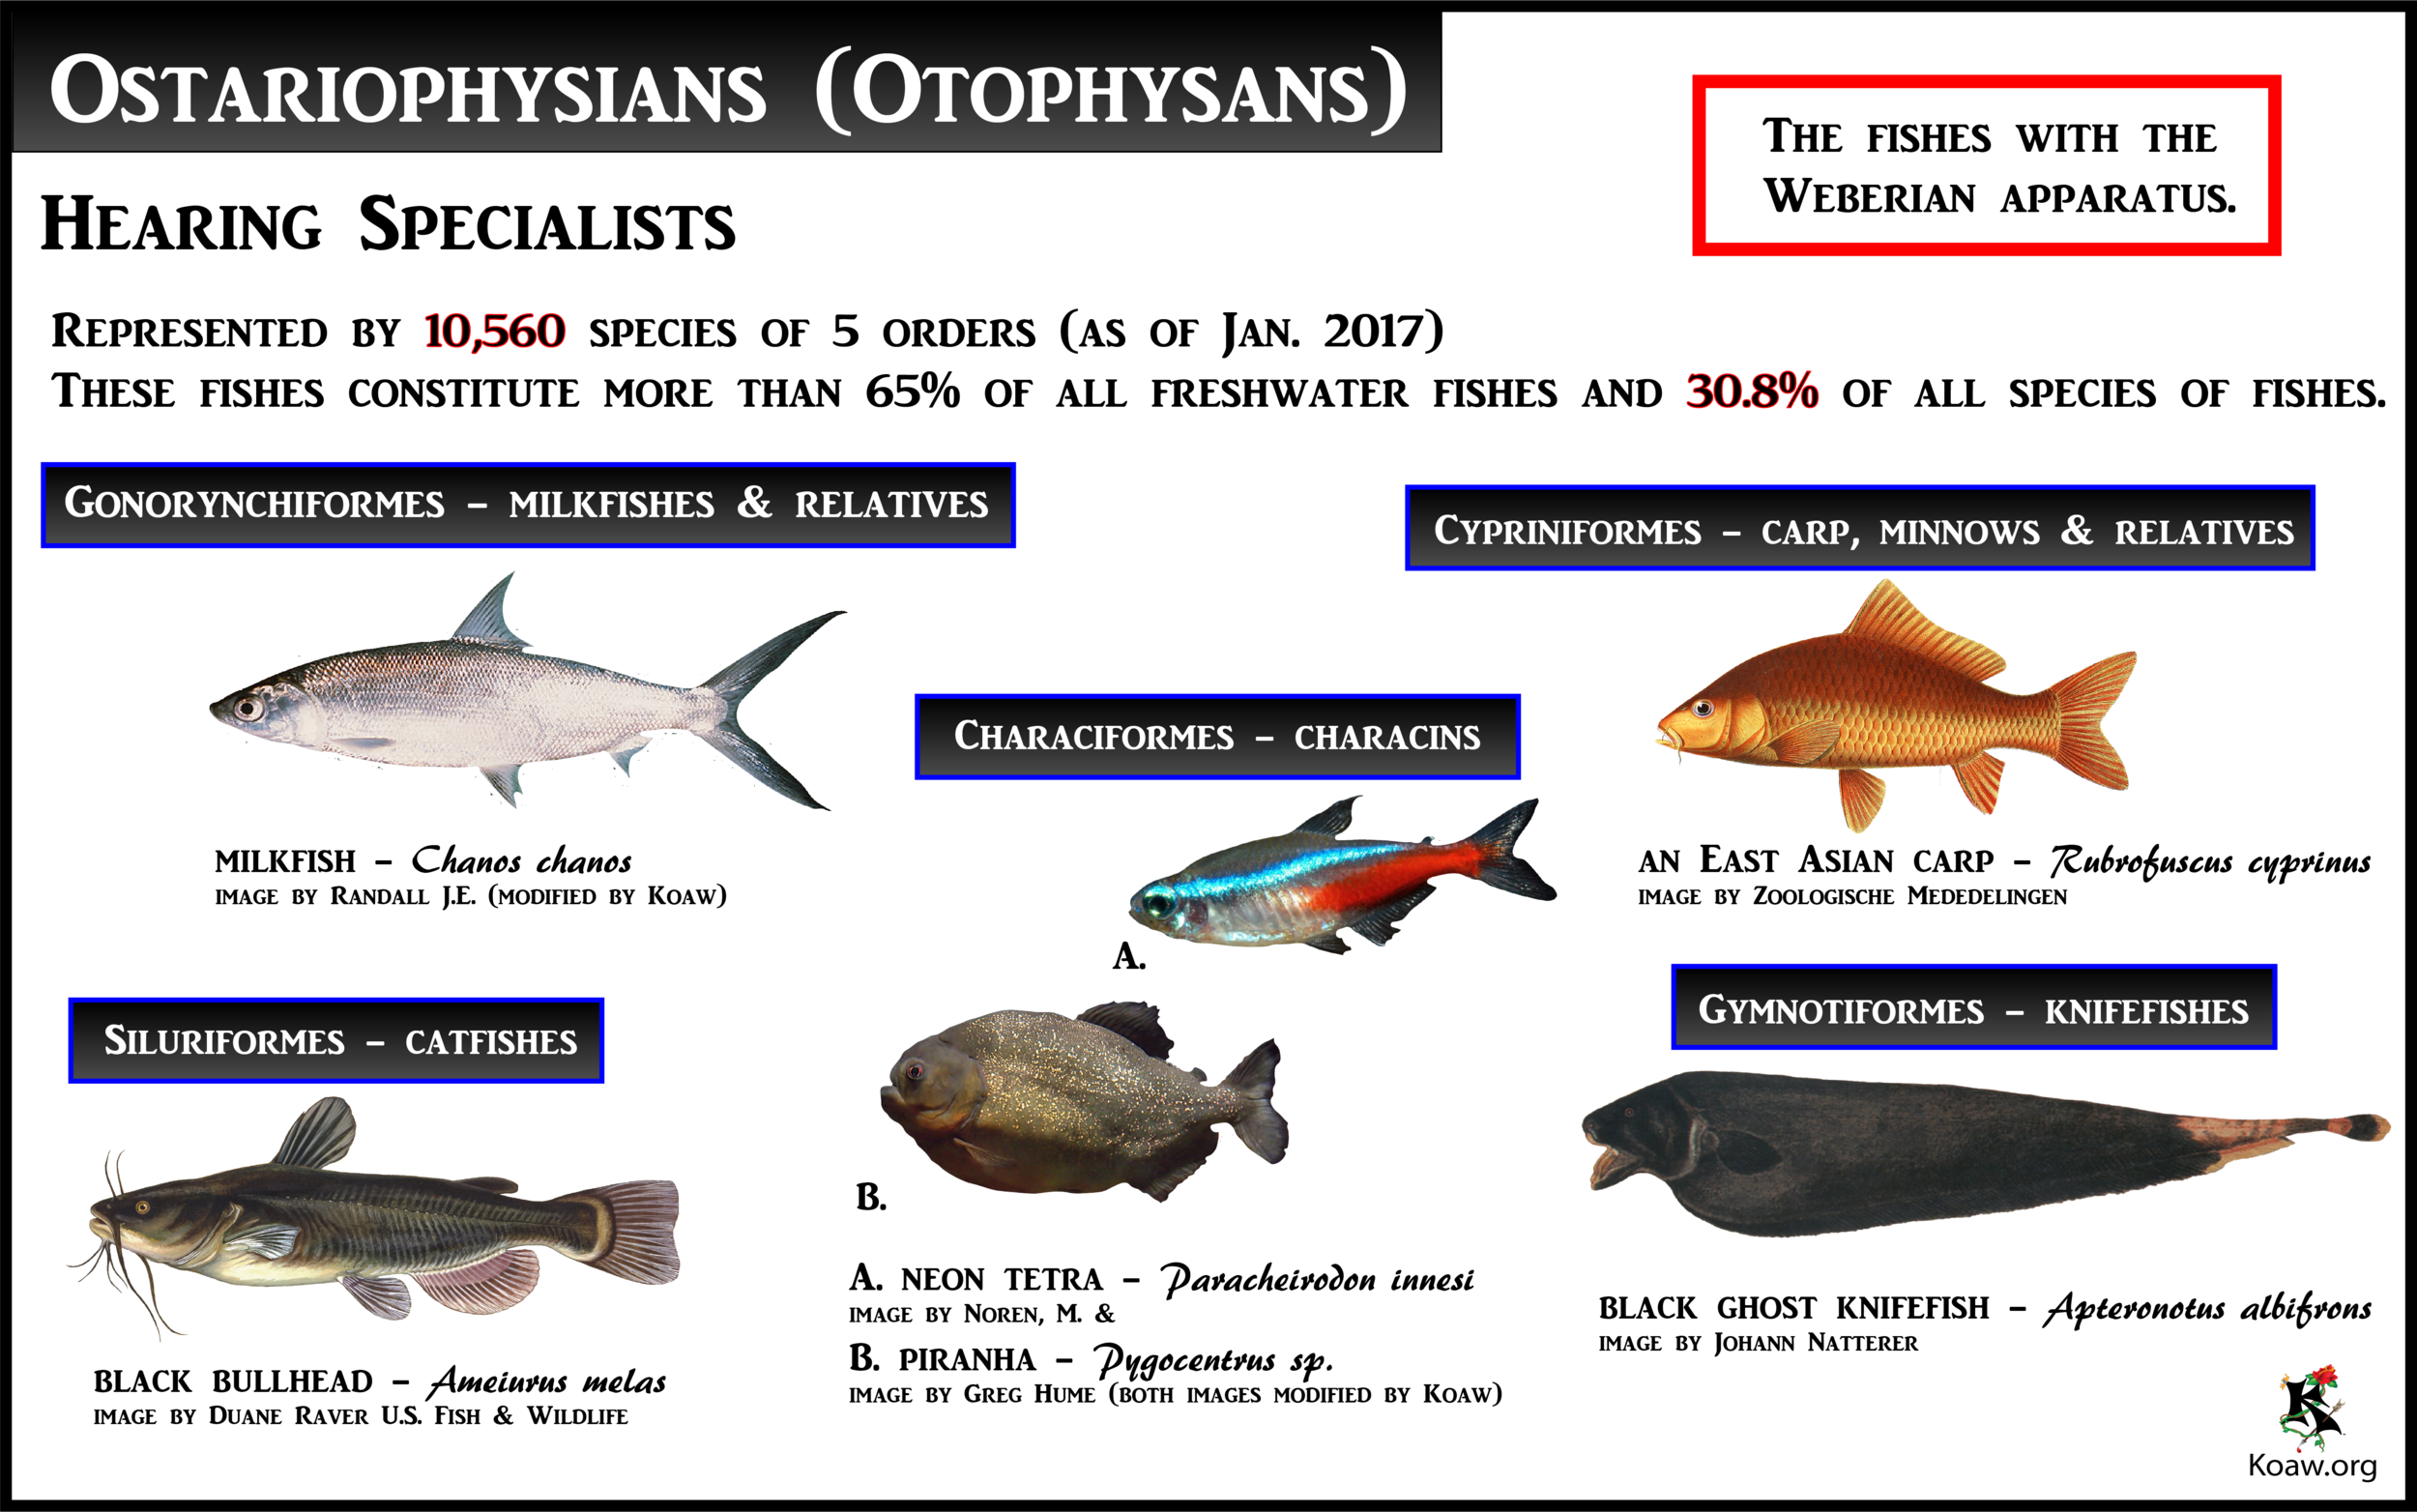 Ostariophysians - The Hearing Specialists with the Weberian Apparatus